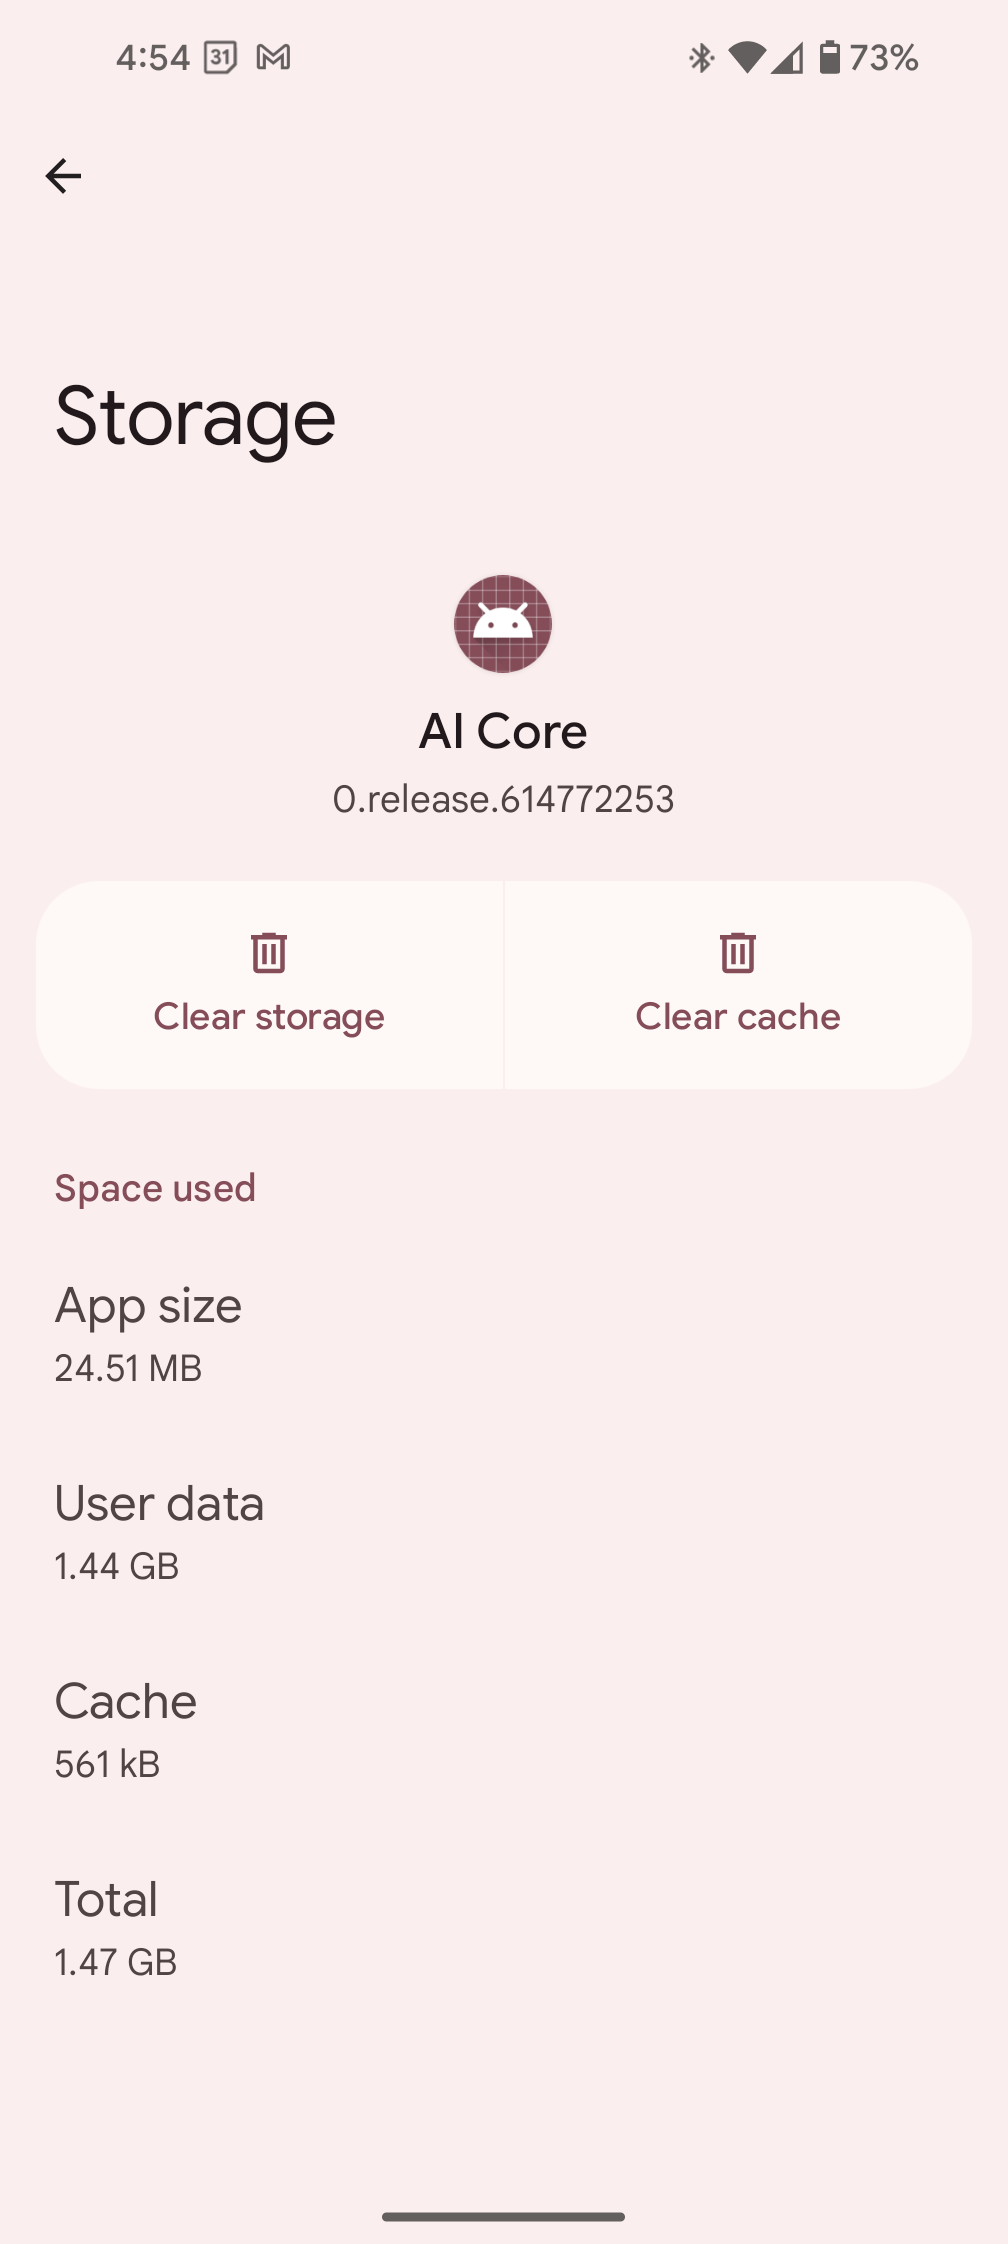 android app storage ai core